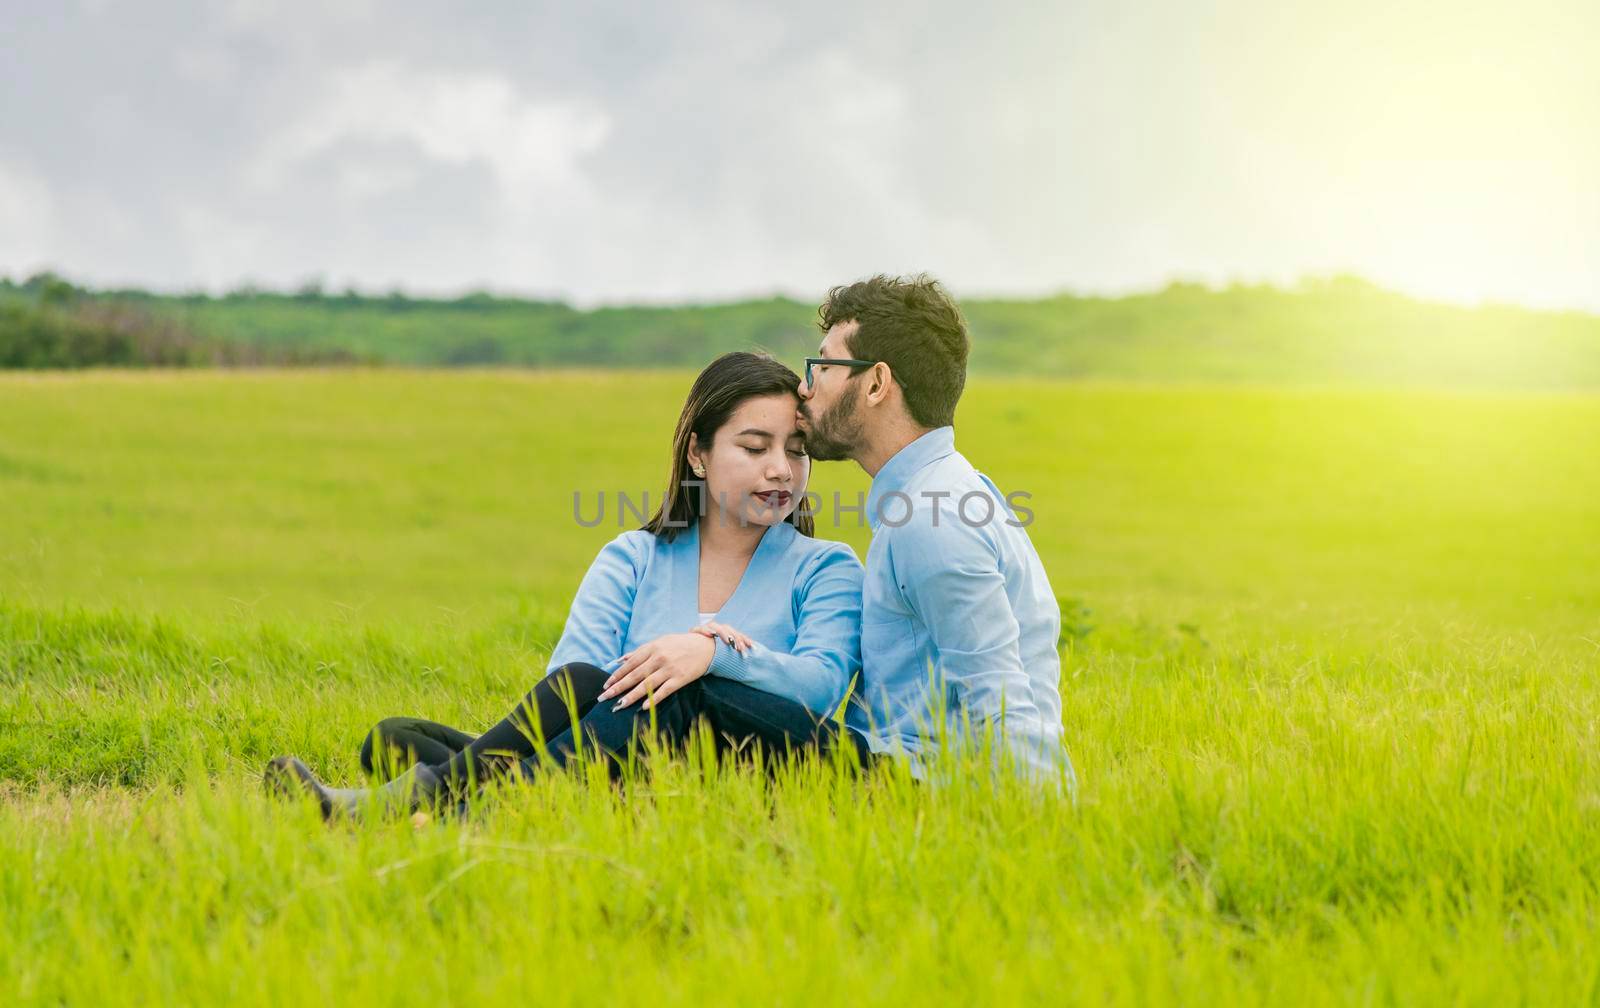 A couple in love sitting in the field kissing their foreheads, A man kissing his girlfriend's forehead in the field, Romantic couple sitting in the grass kissing their foreheads by isaiphoto